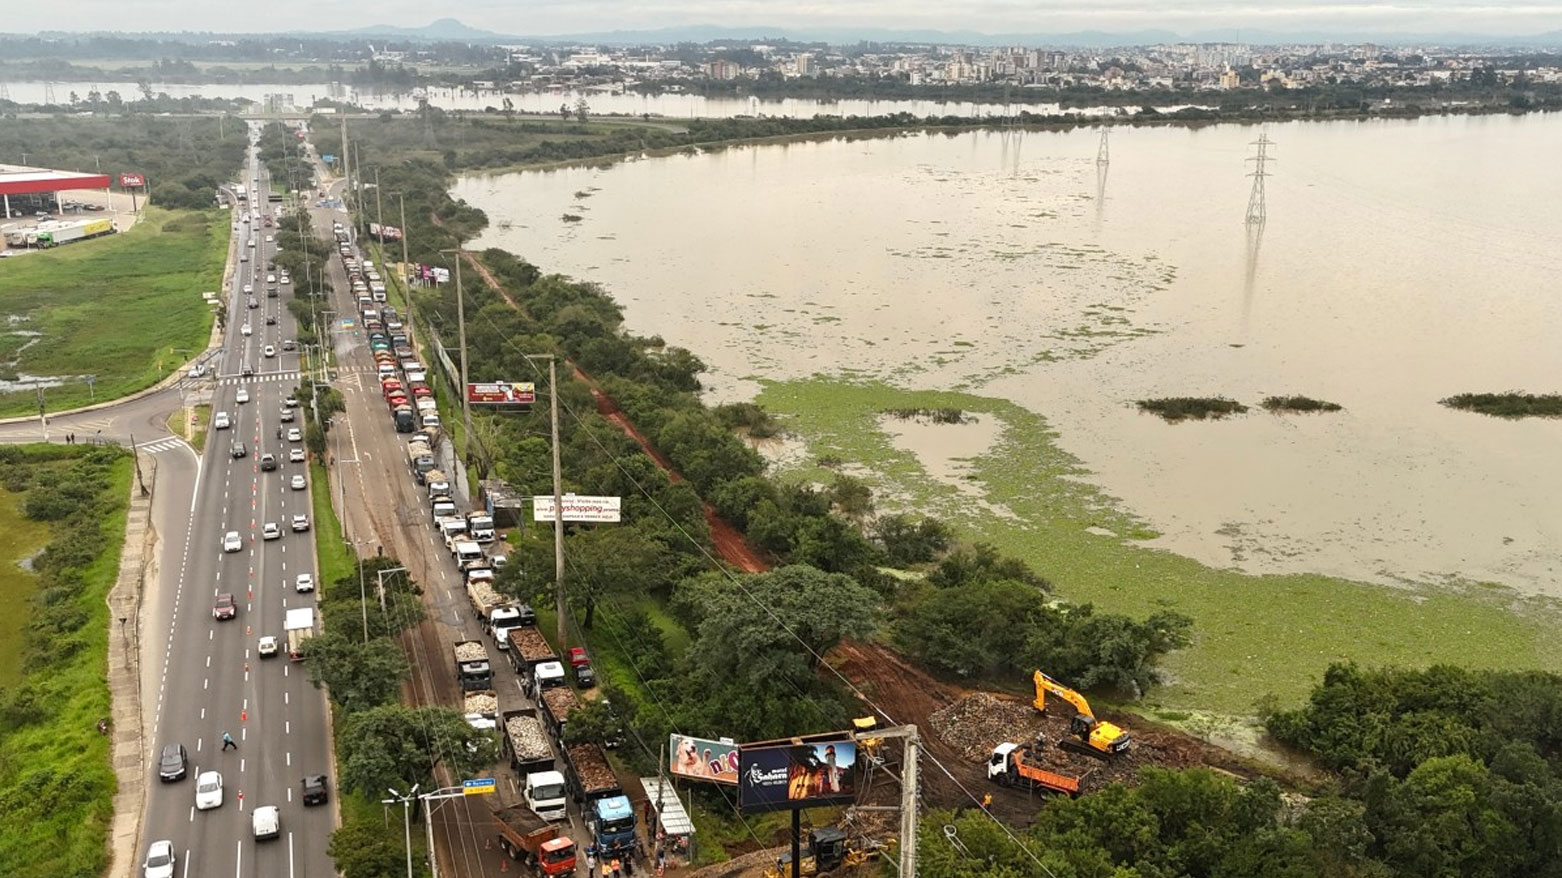 A view of the floods in southern region of Brazil. (Photo: AFP)